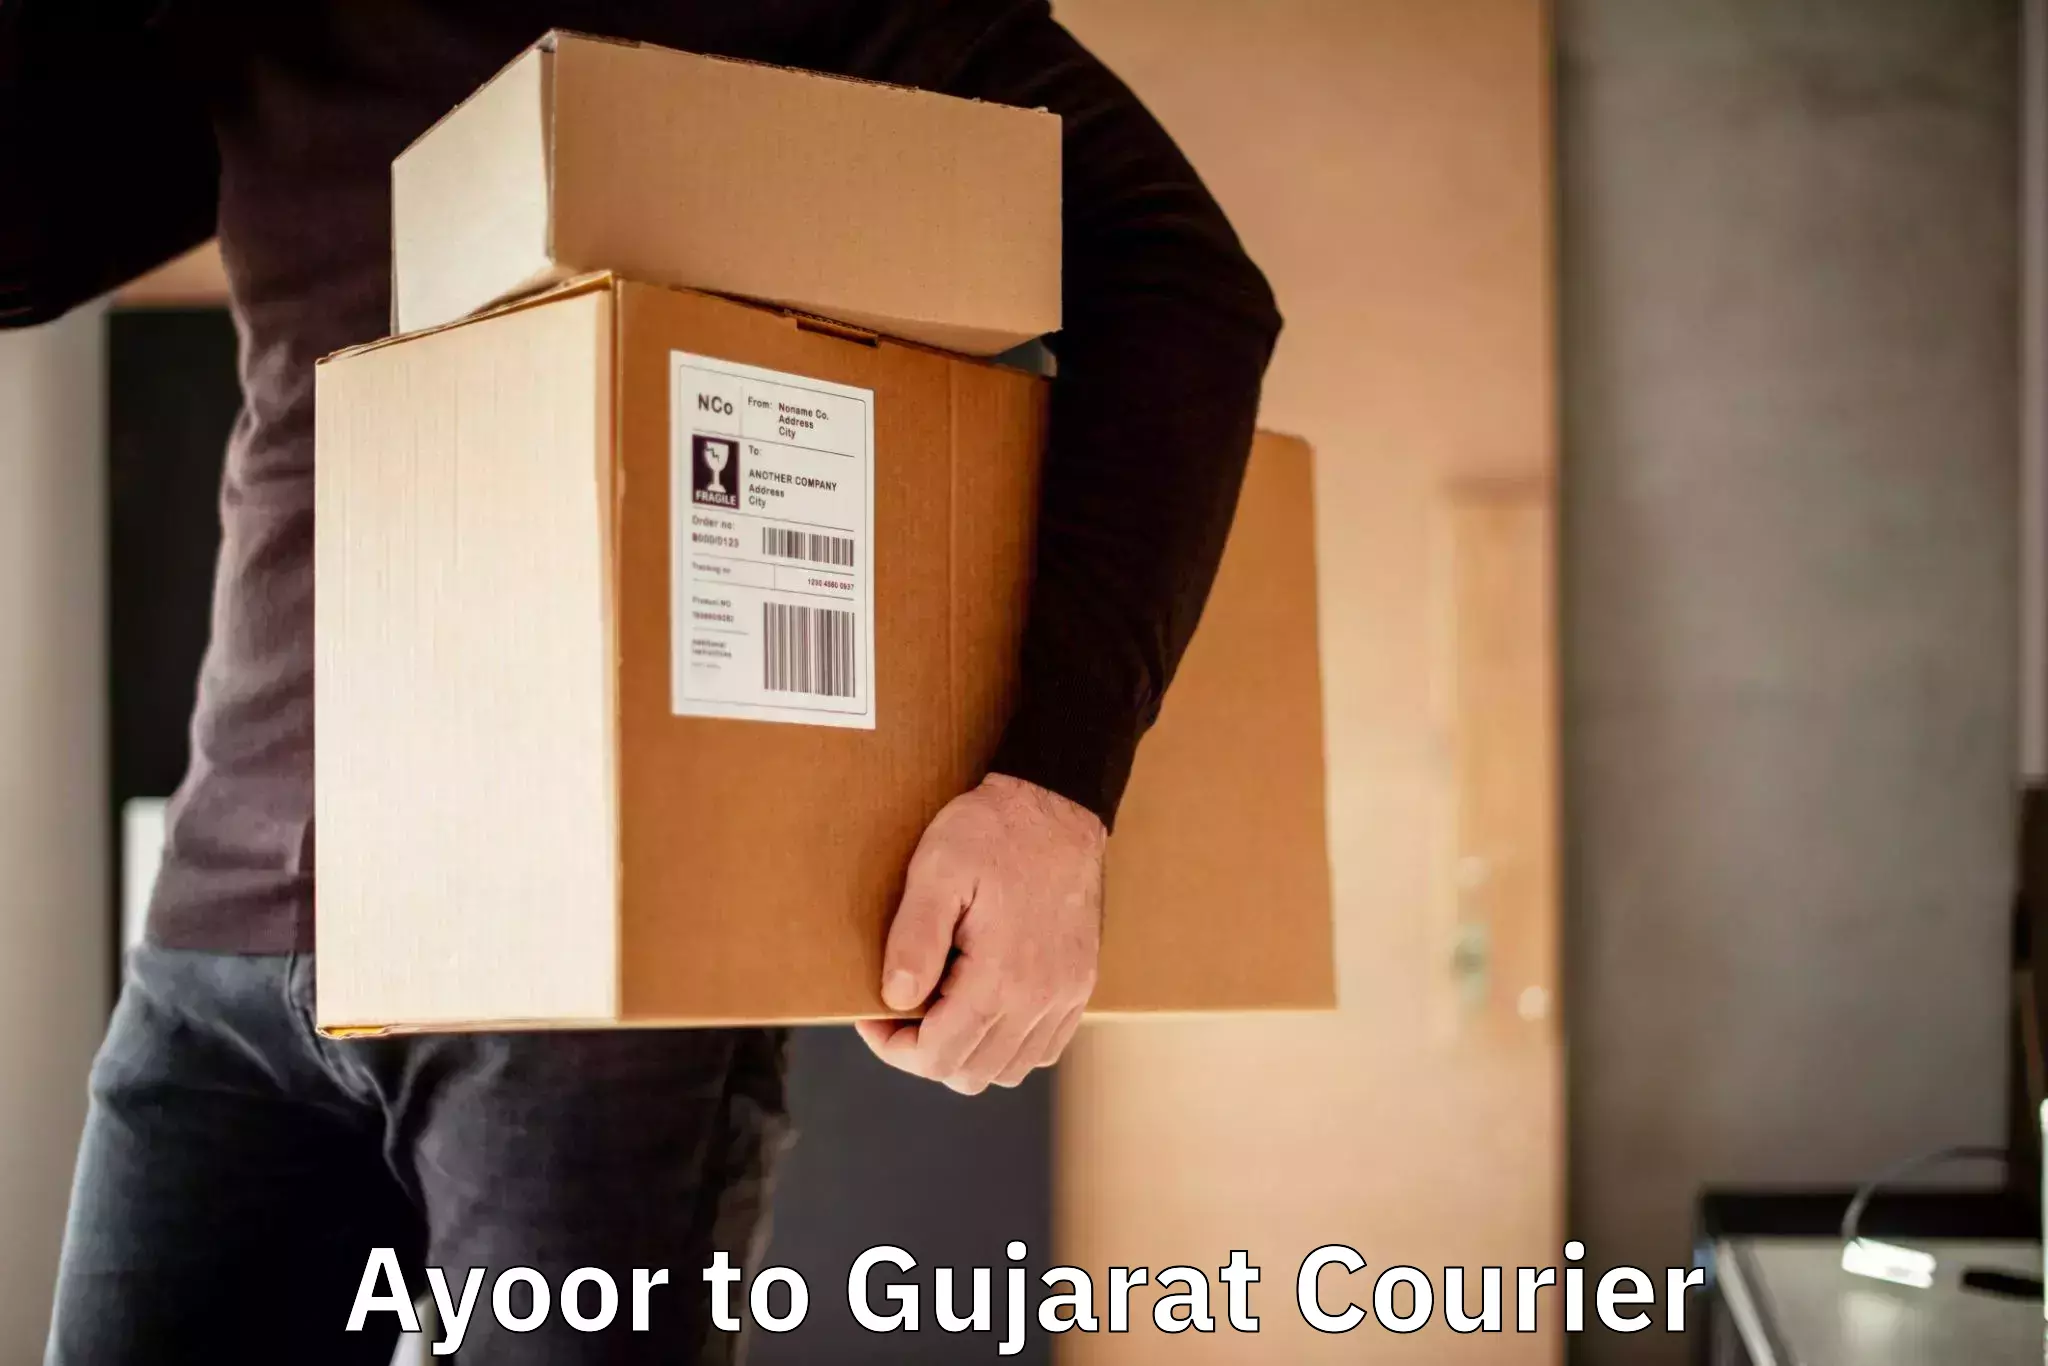 Nationwide courier service Ayoor to Gujarat